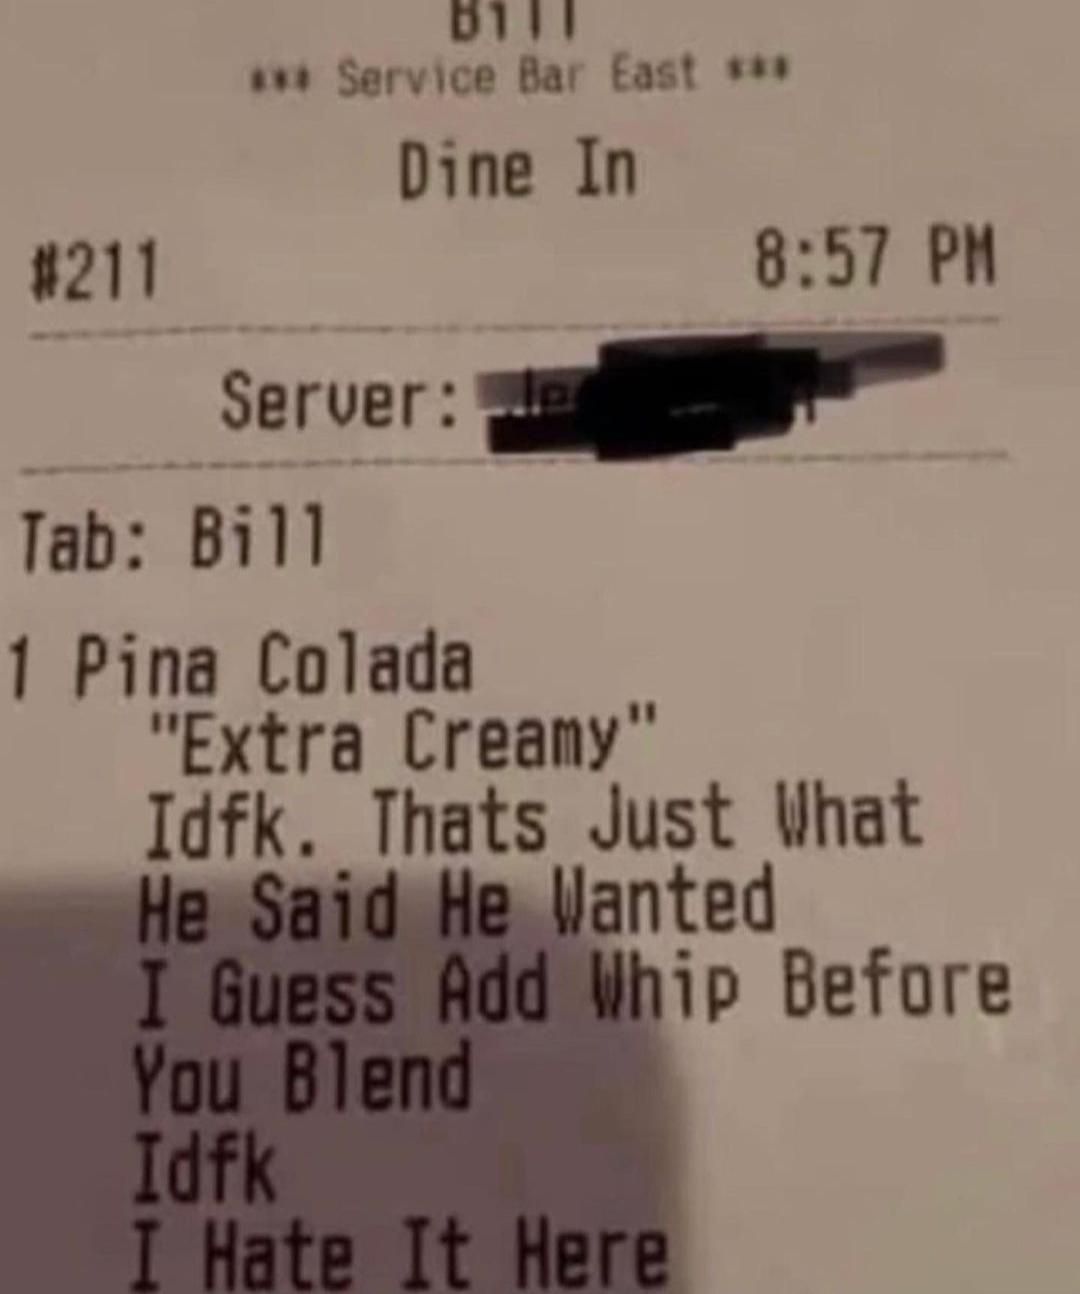 Y'all be clear about what you ask to a server the next time